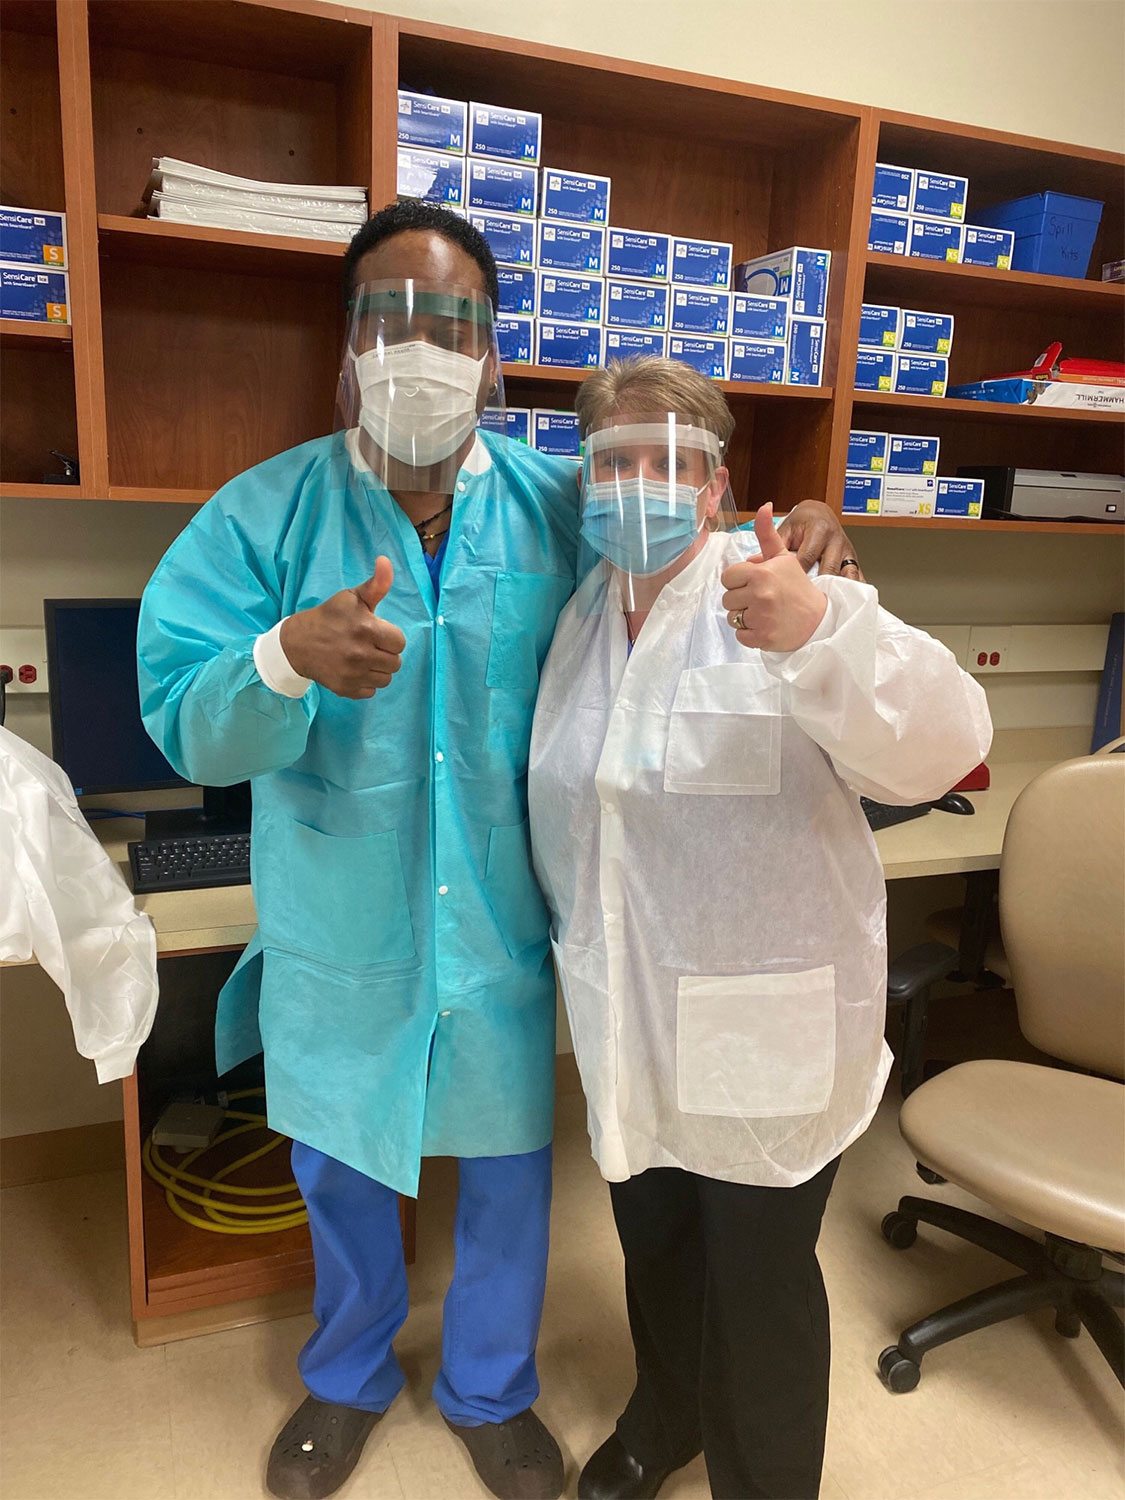 Phlebotomists at the Orange Regional Medical Center show their appreciation for the new face shields they received that were made at the SUNY New Paltz 3D printing lab.